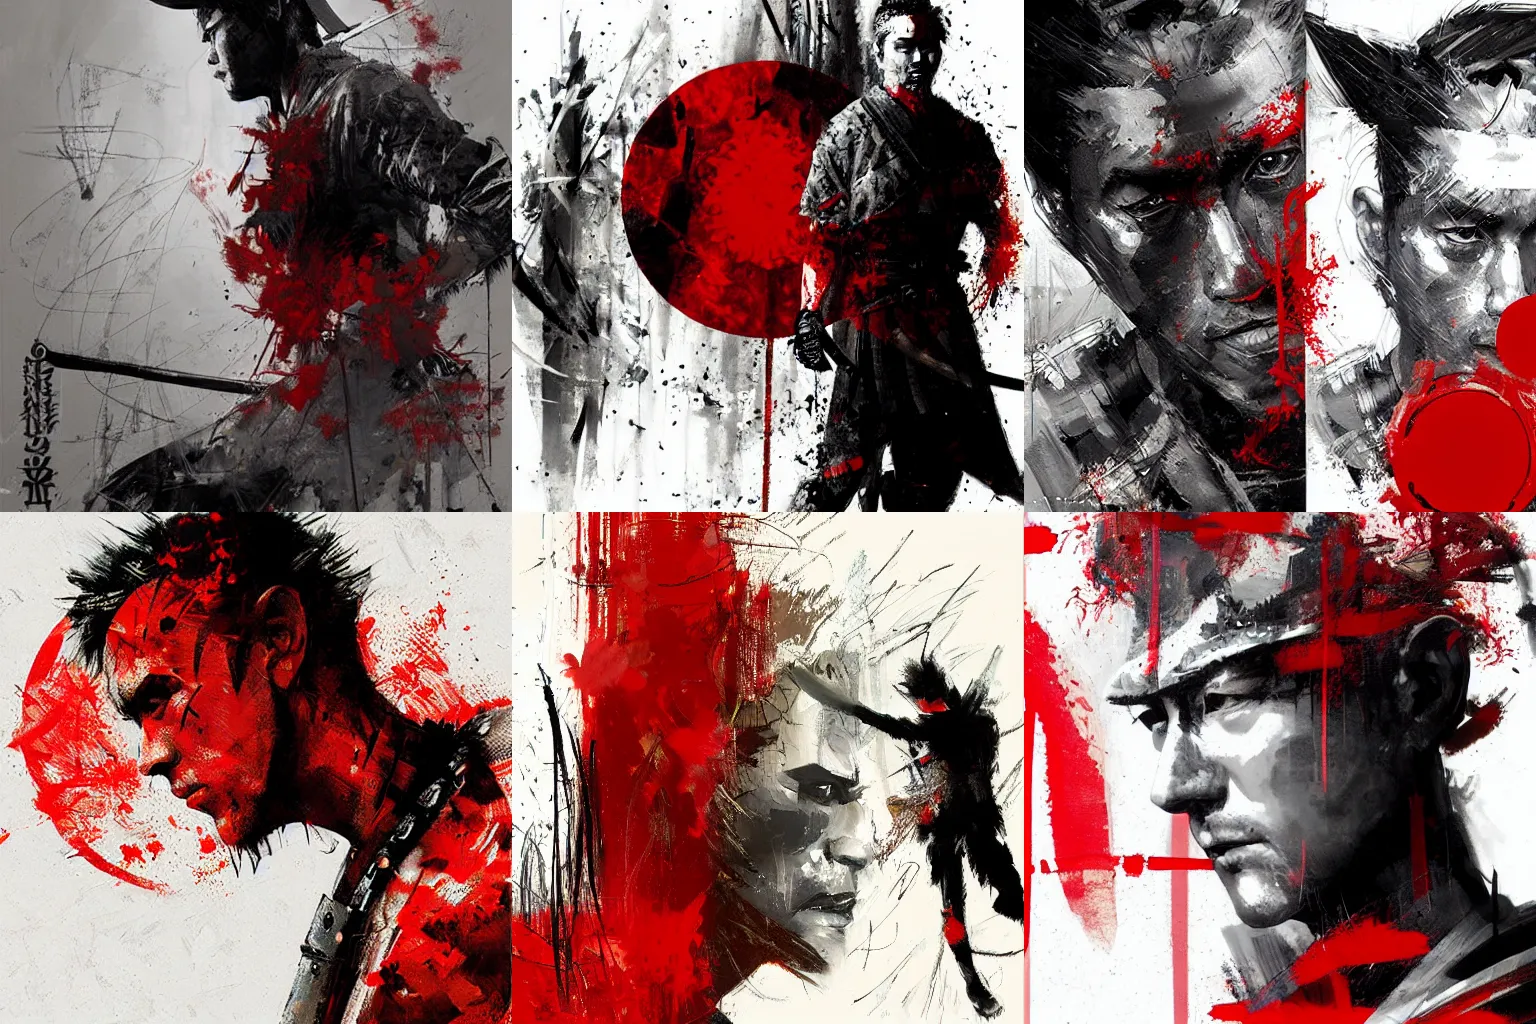 Prompt: artwork by Russ Mills and Craig Mullins showing a samurai in front of a red circle